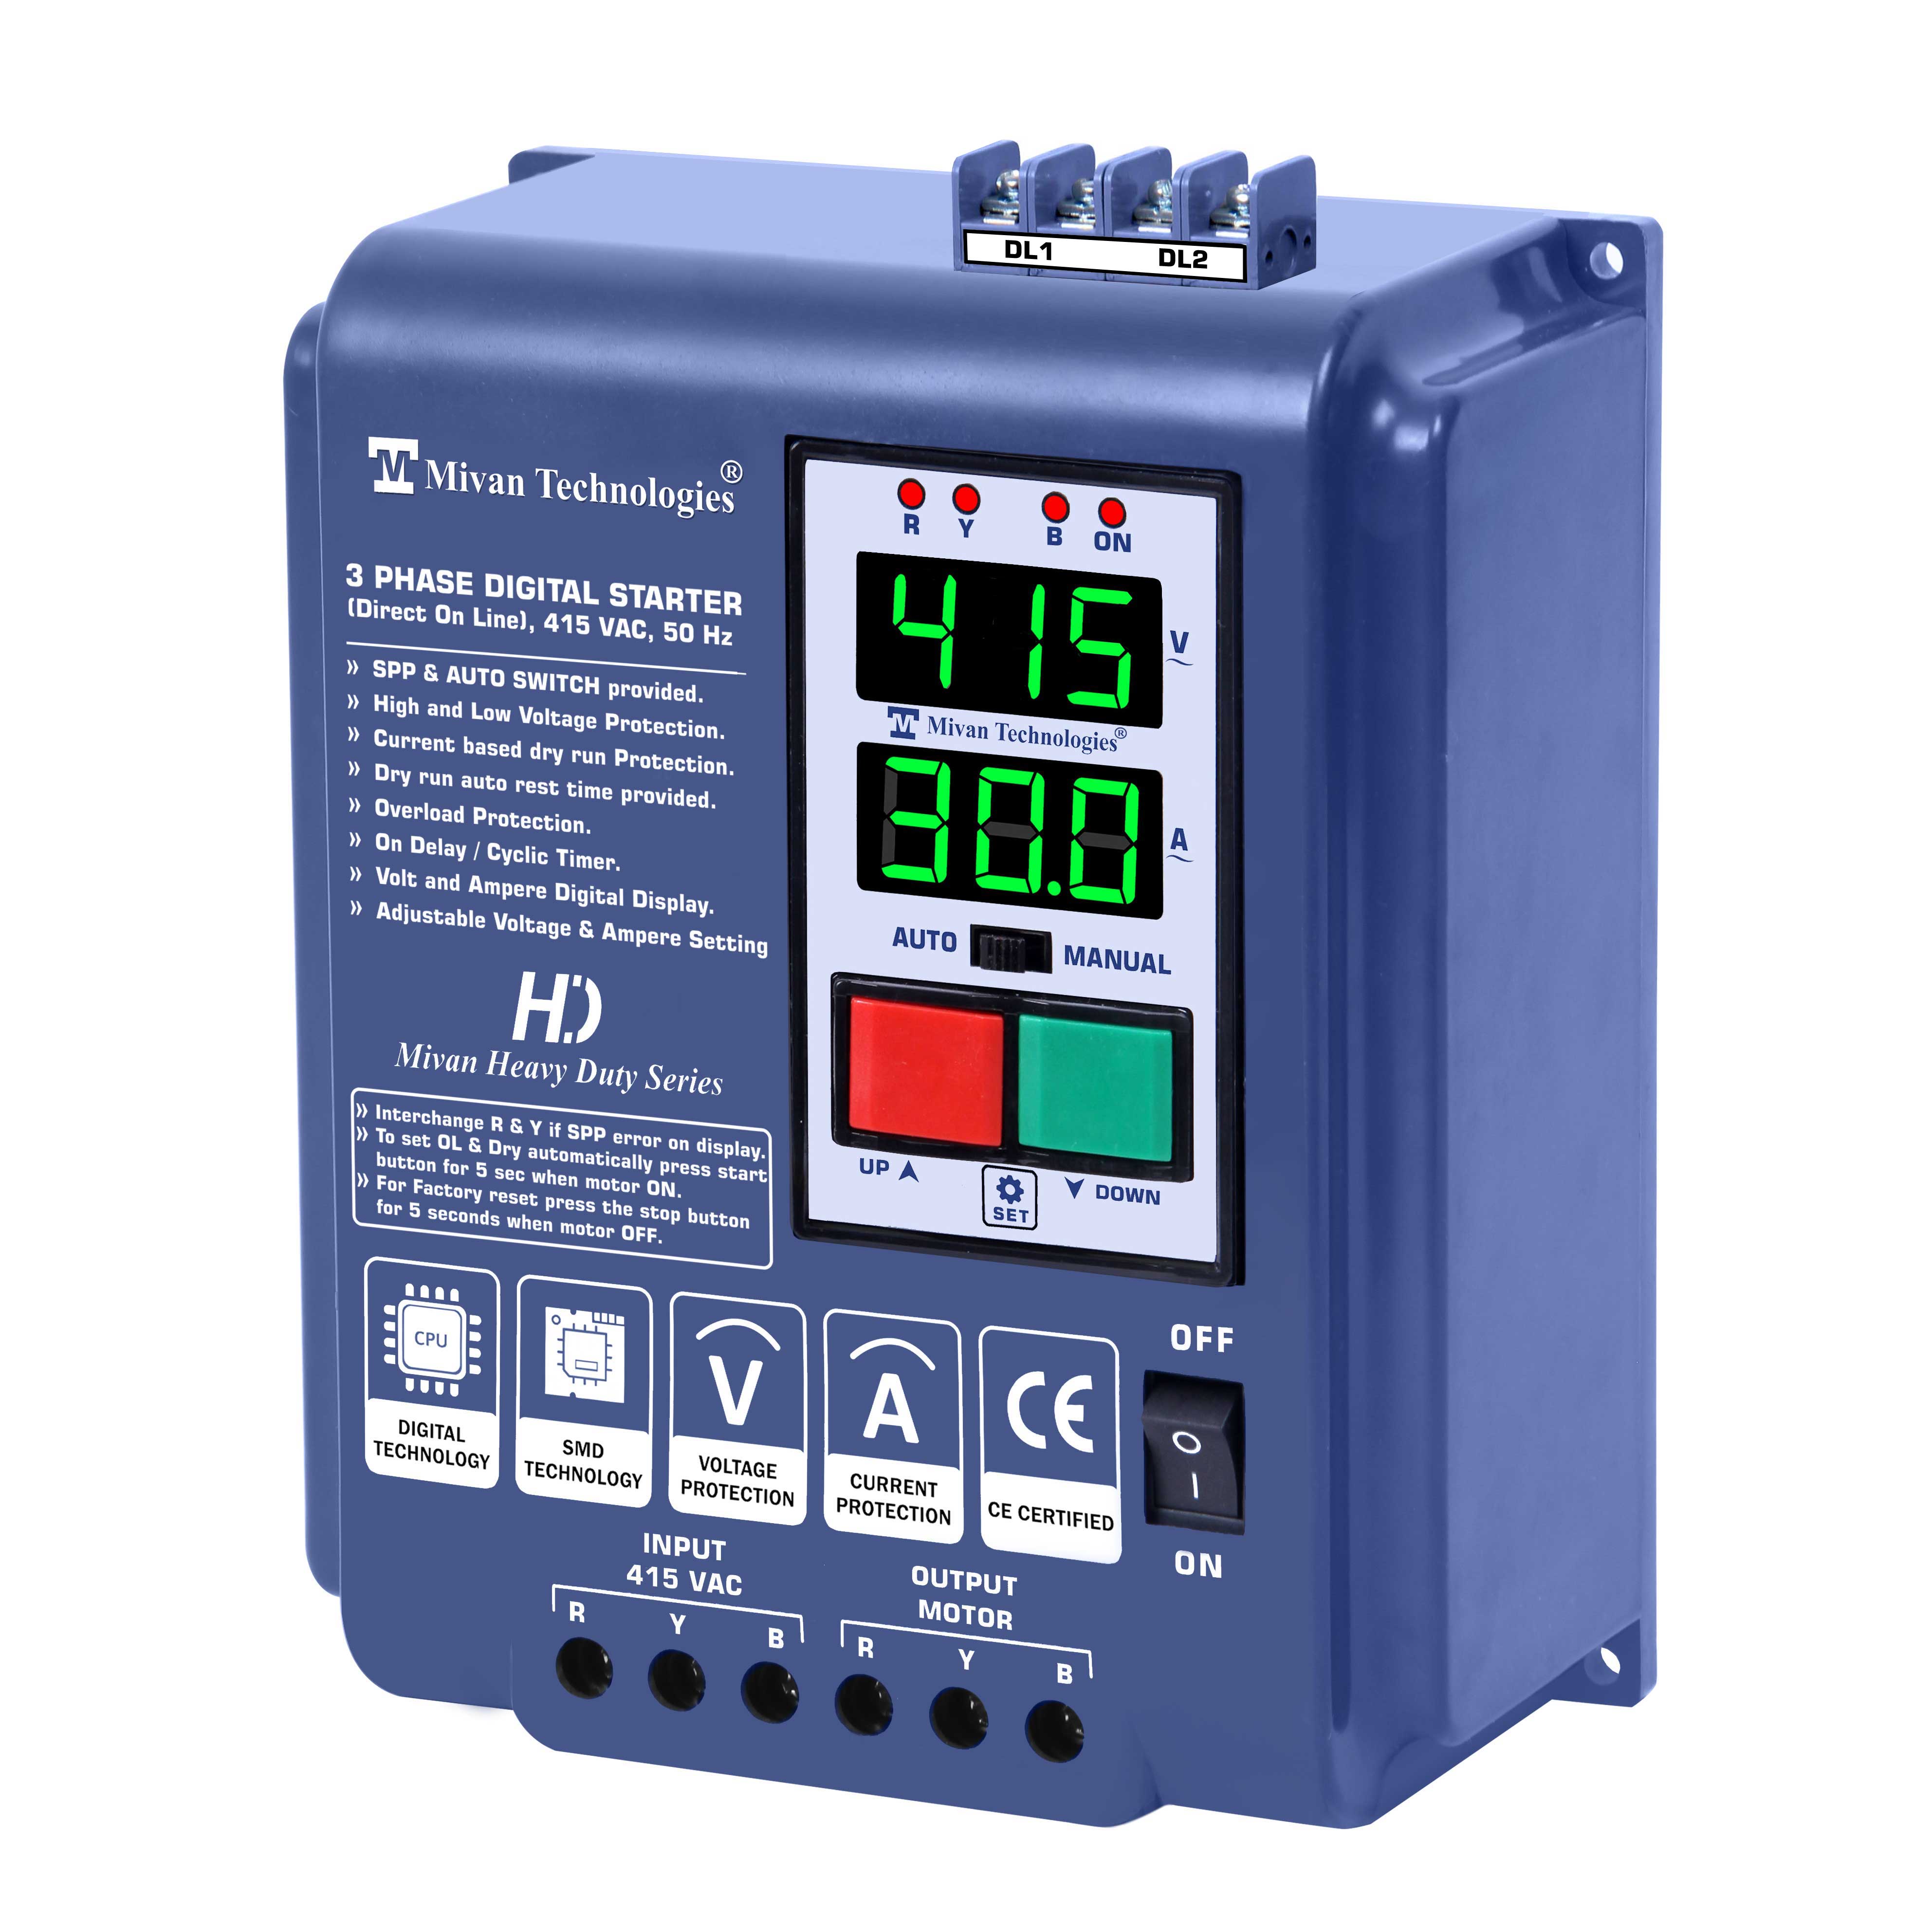 DP 301S CO 3 Phase DOL Digital Starter for 3 Phase compressor Motor Suitable up to 10 hp Motor with HV LV OL Dry protections with SPP Auto switch and cyclic timer